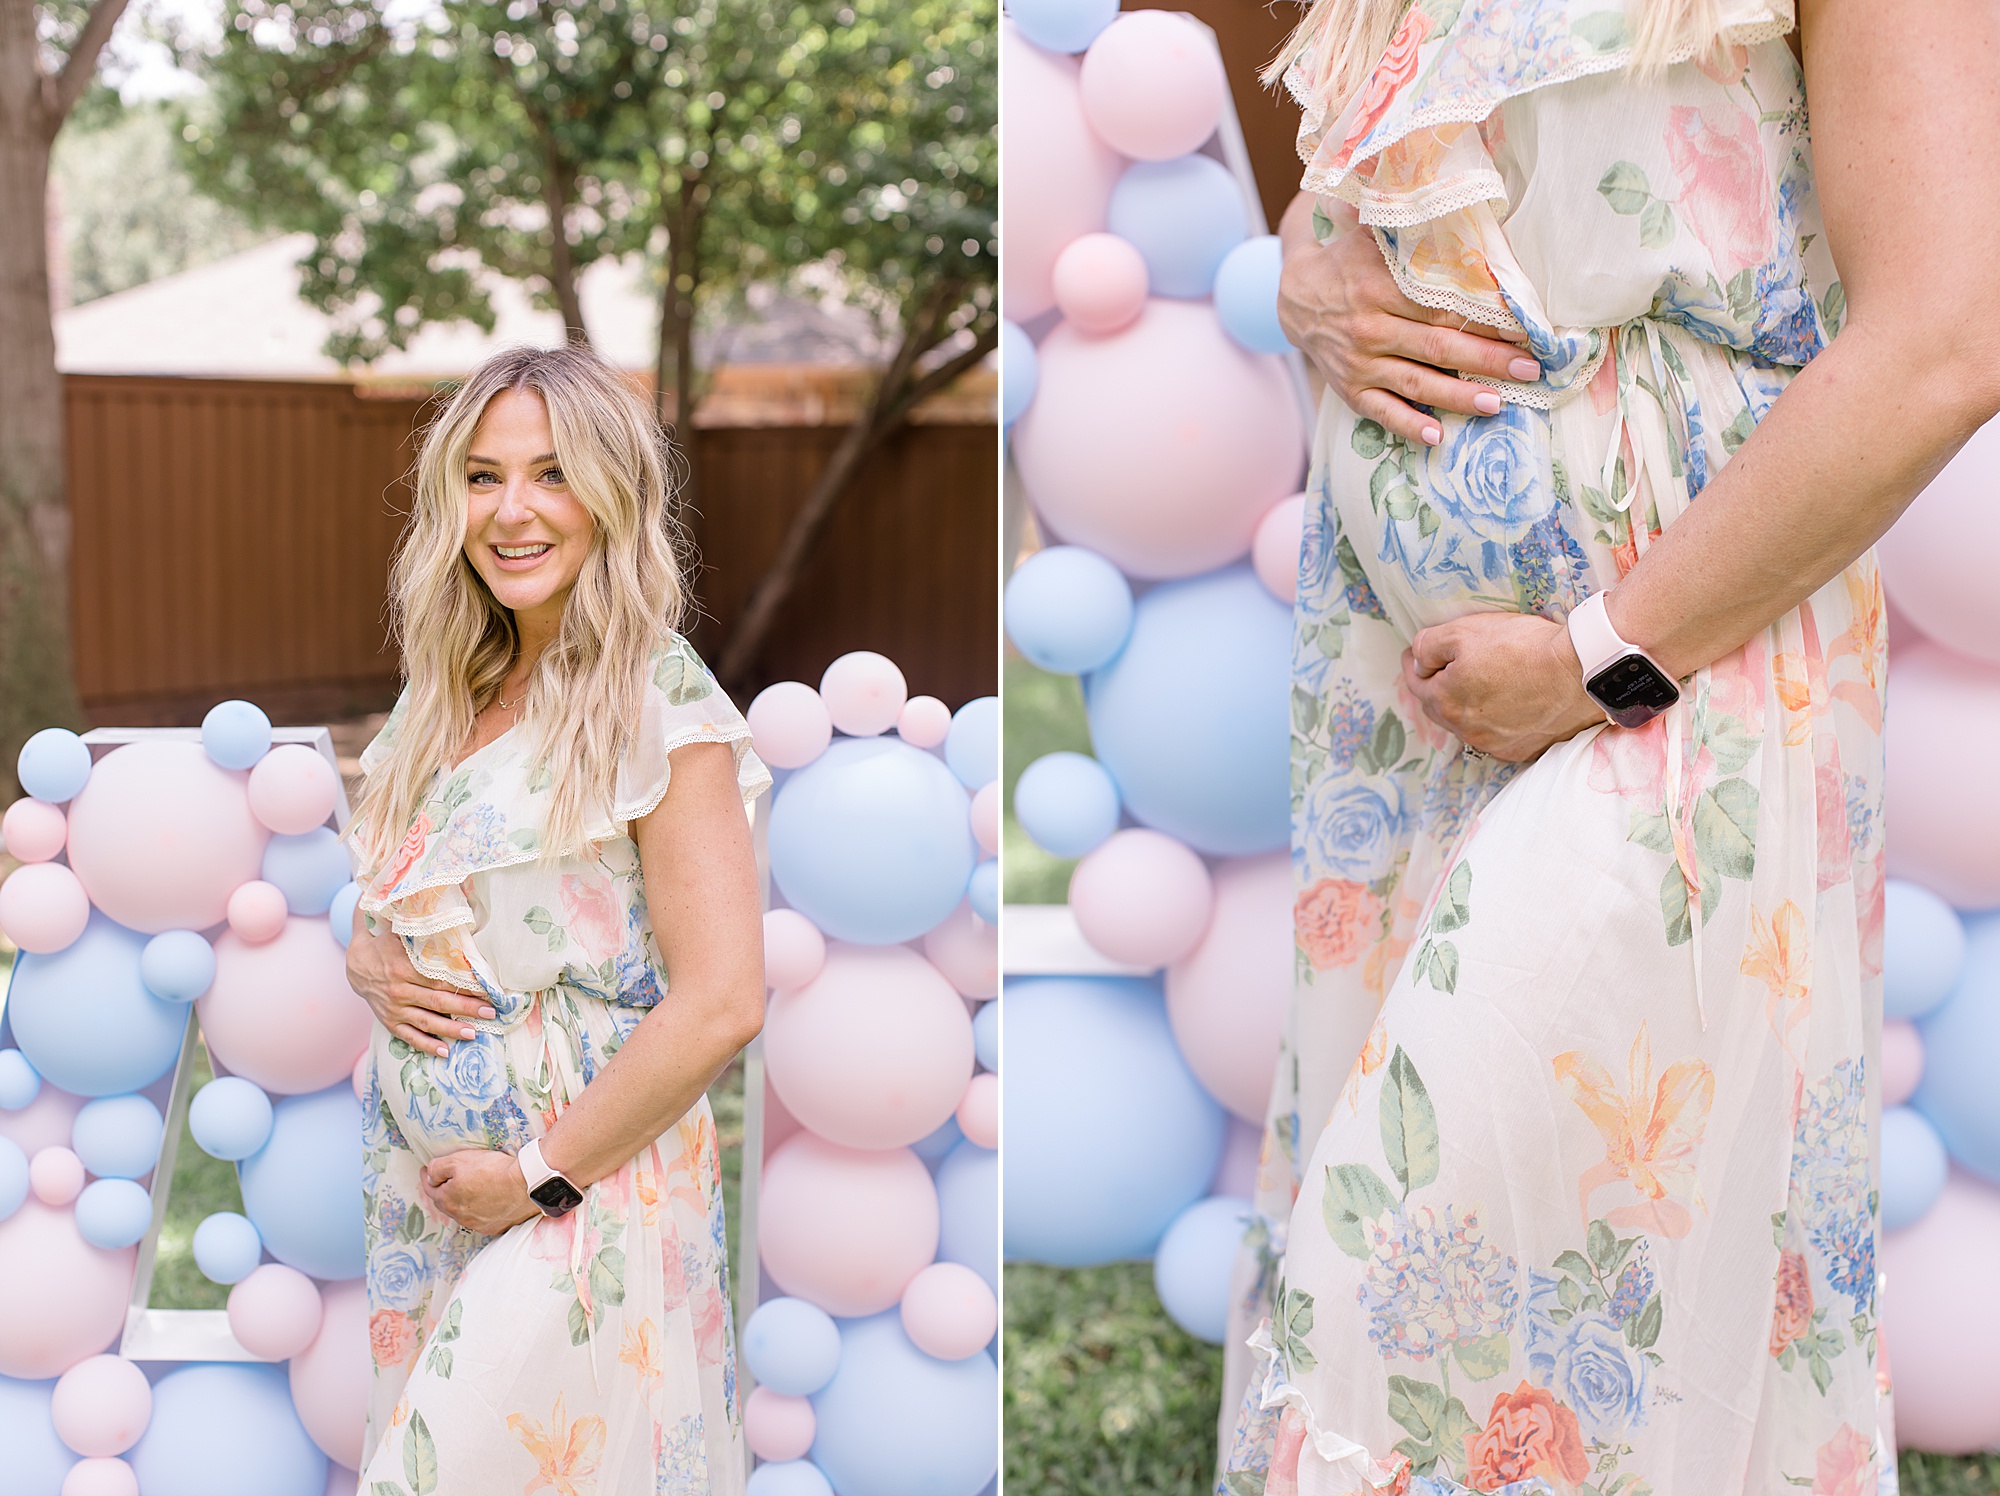 mom-to-be hugs belly during maternity photos in backyard